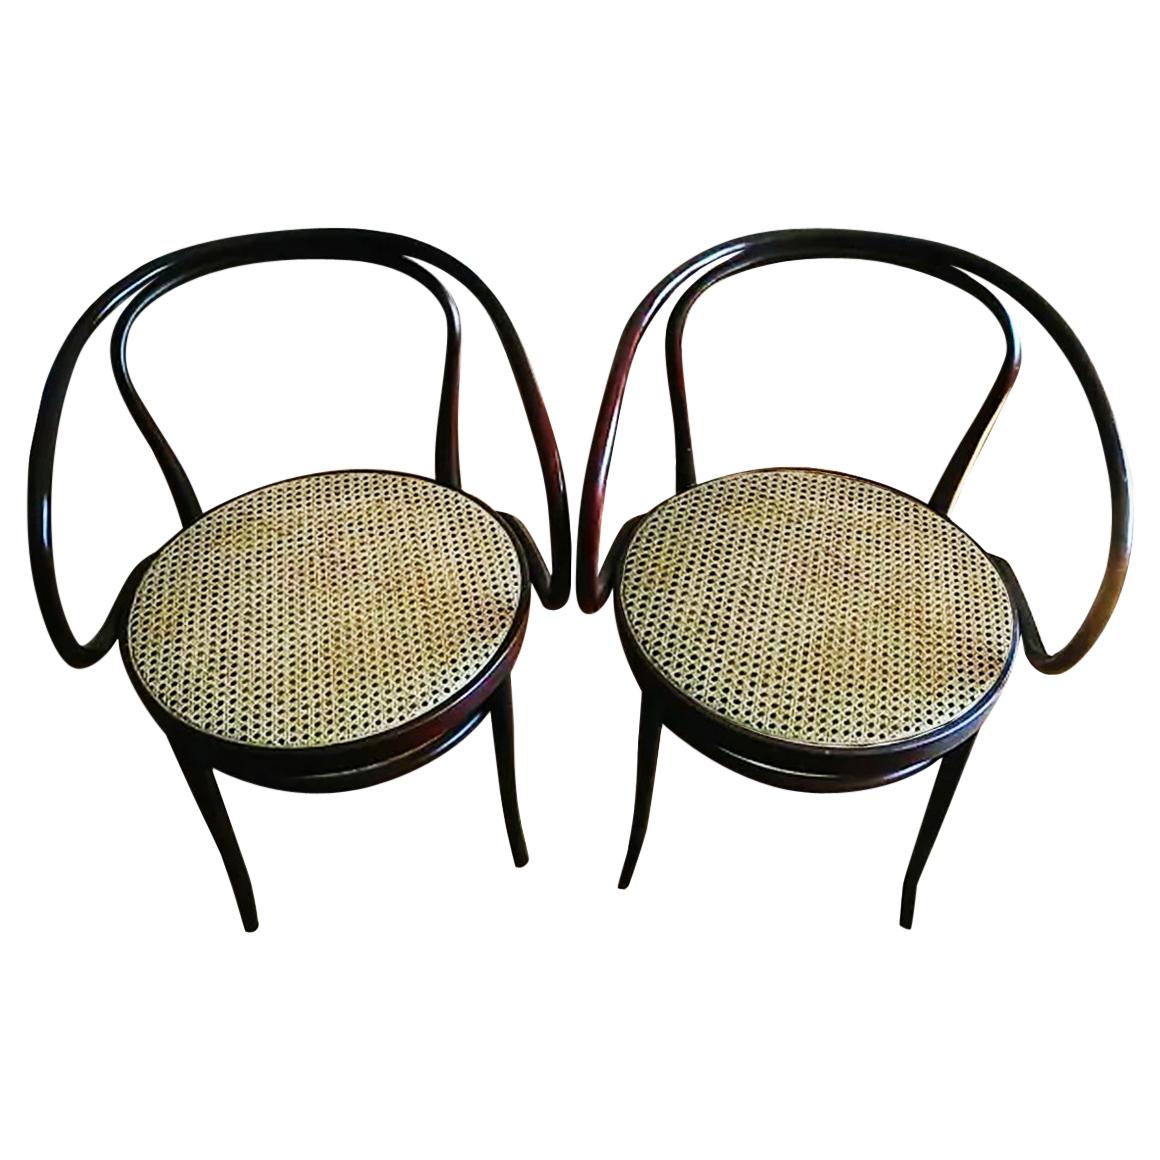 Pair of Cane and Bentwood Chairs after Thonet 209, 1950s